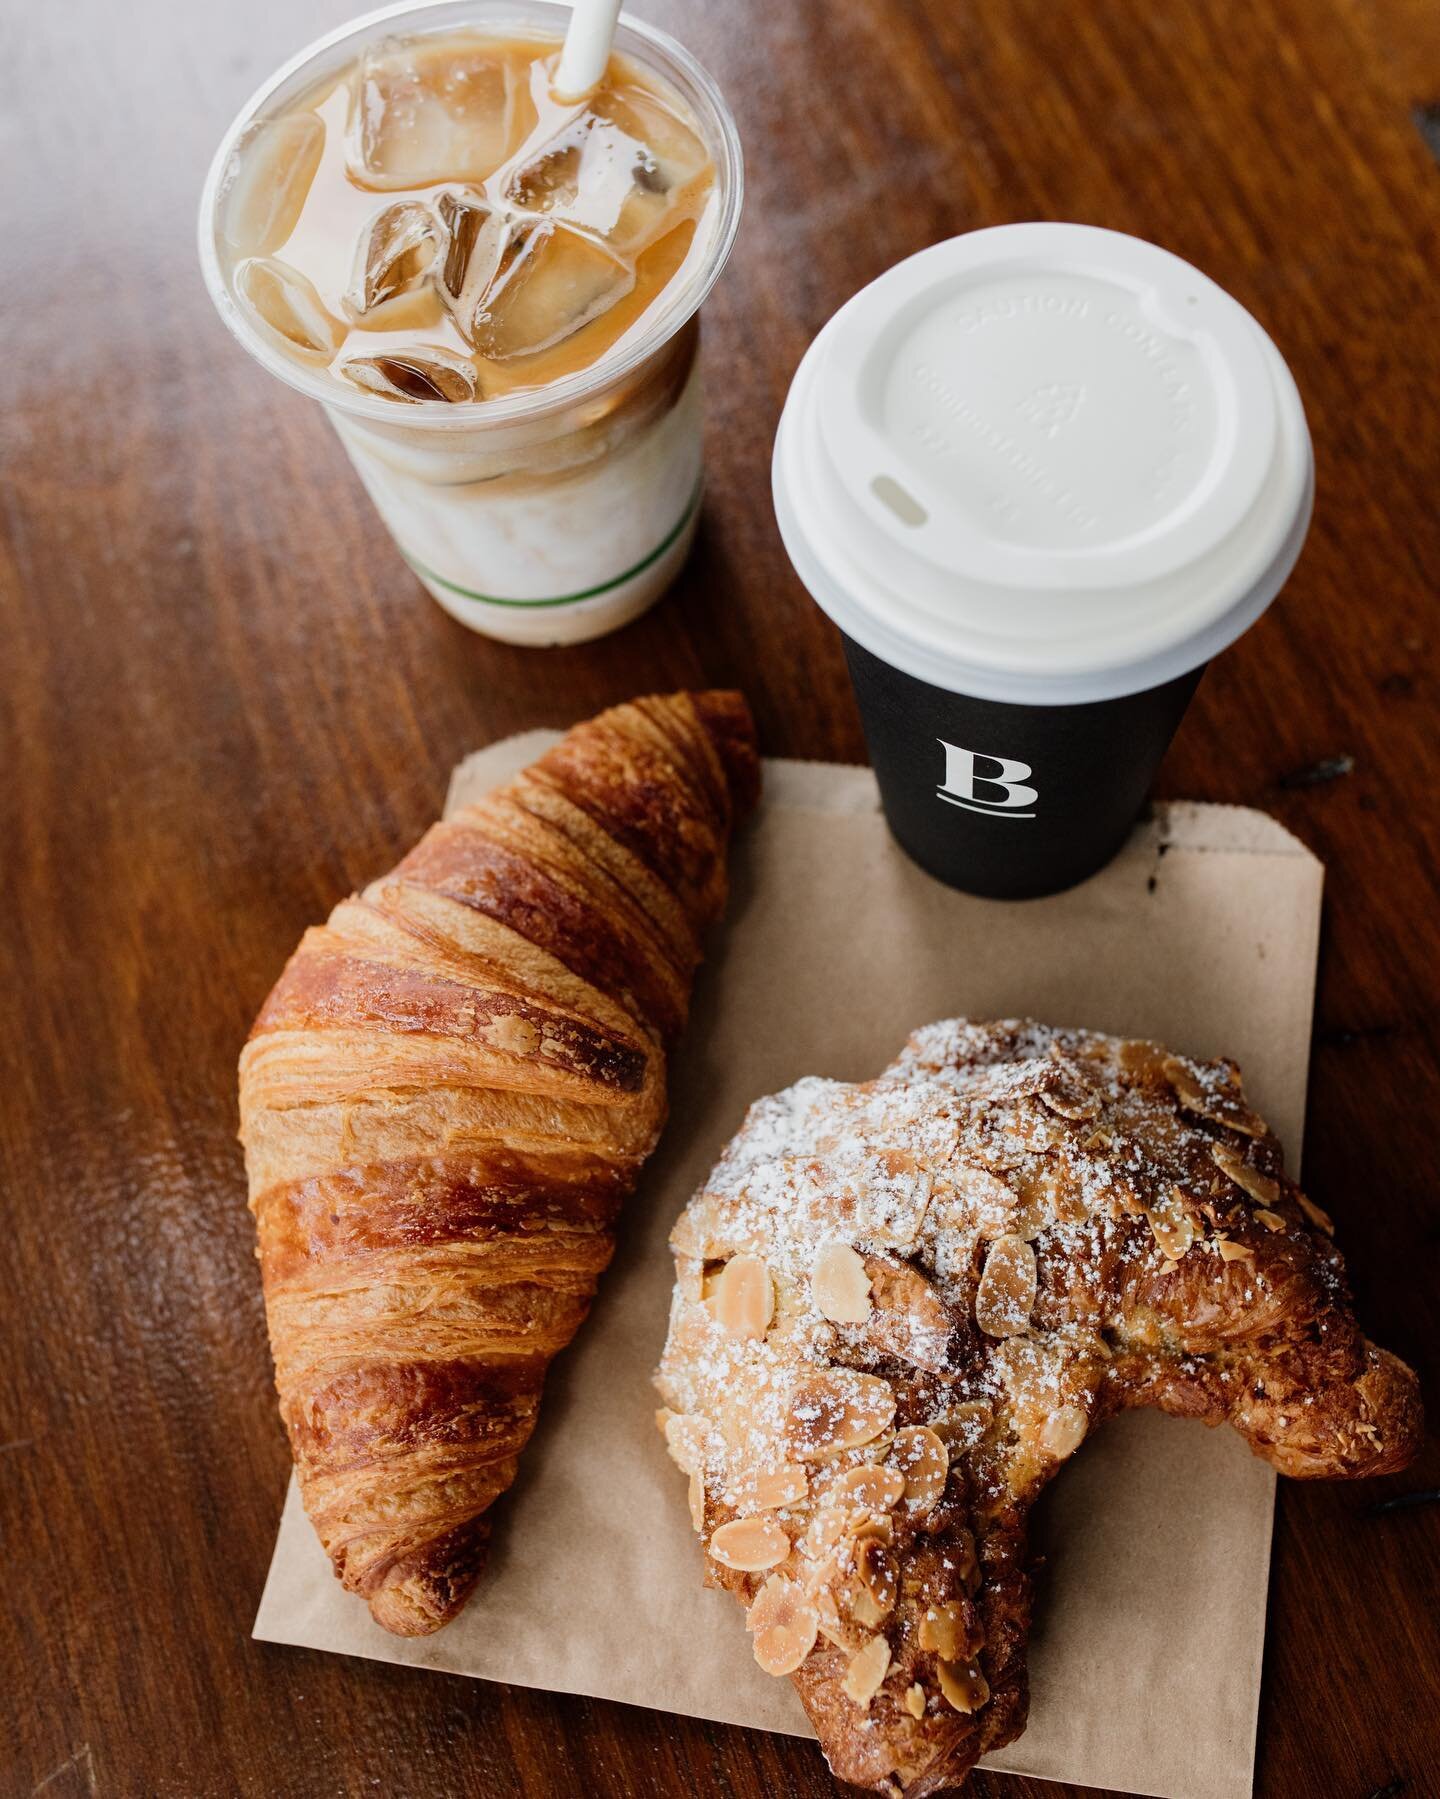 Morning vibes with my all-time favorite combo: iced coffee and a heavenly almond croissant. This dynamic duo never fails to kickstart my day and keep me energized throughout. ☕️🥐 #CoffeeLover #PastryPerfection #MorningRituals #IcedCoffee #AlmondCroi